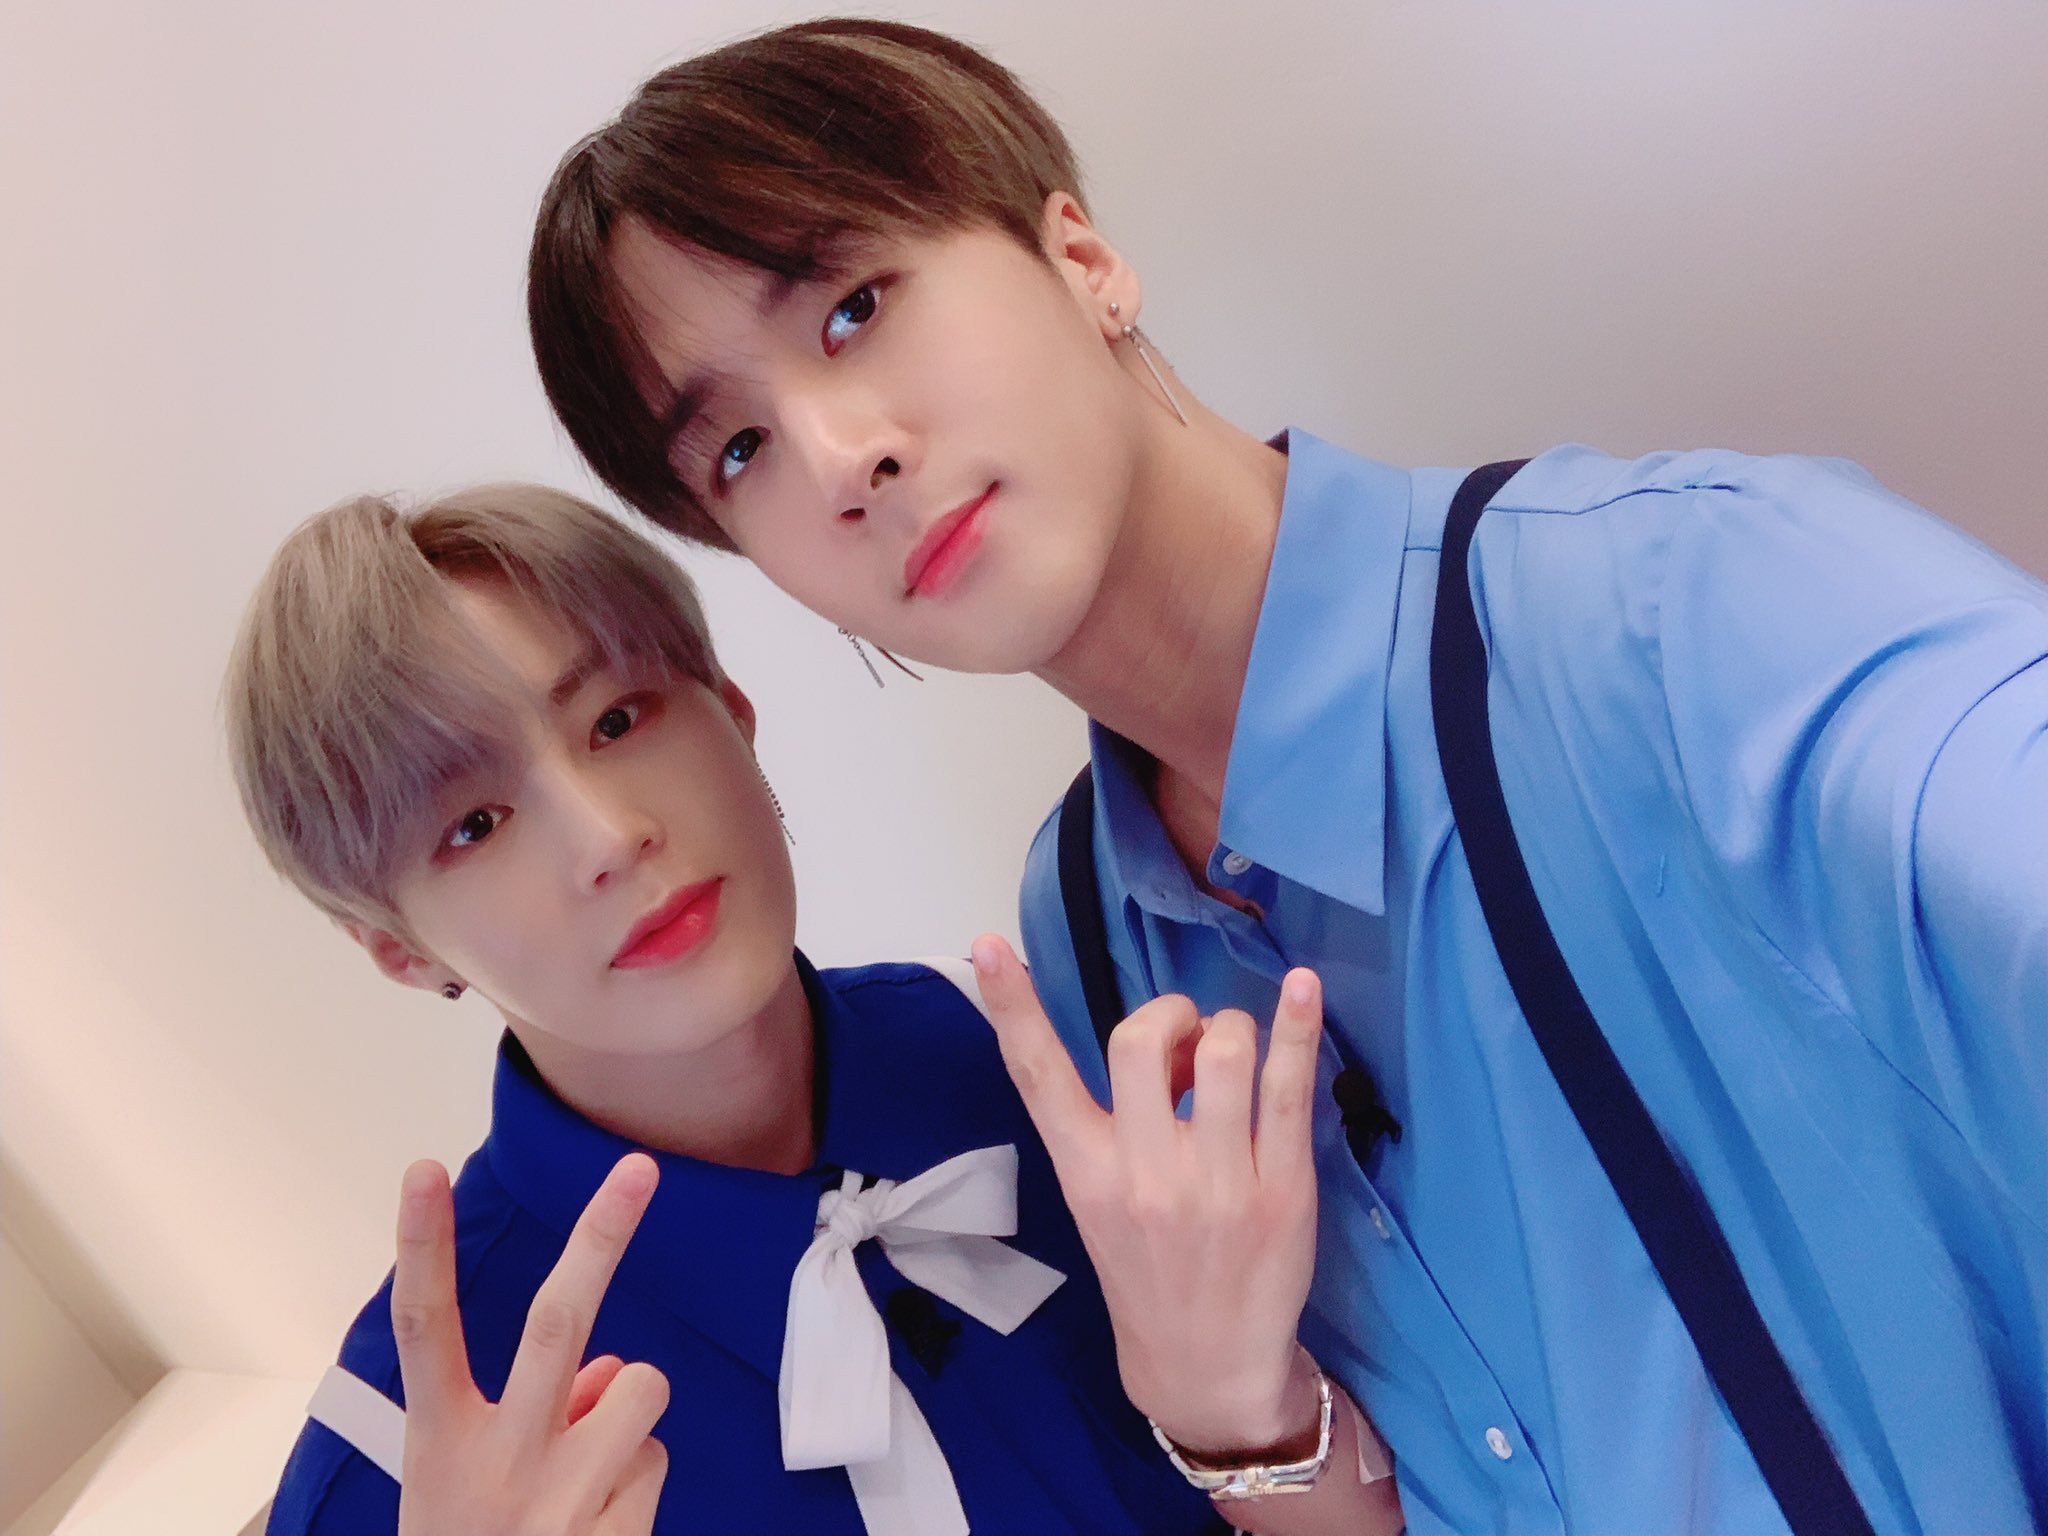 Ha Sung Woon joins 'Question mark' with Ravi, certifies special friendship